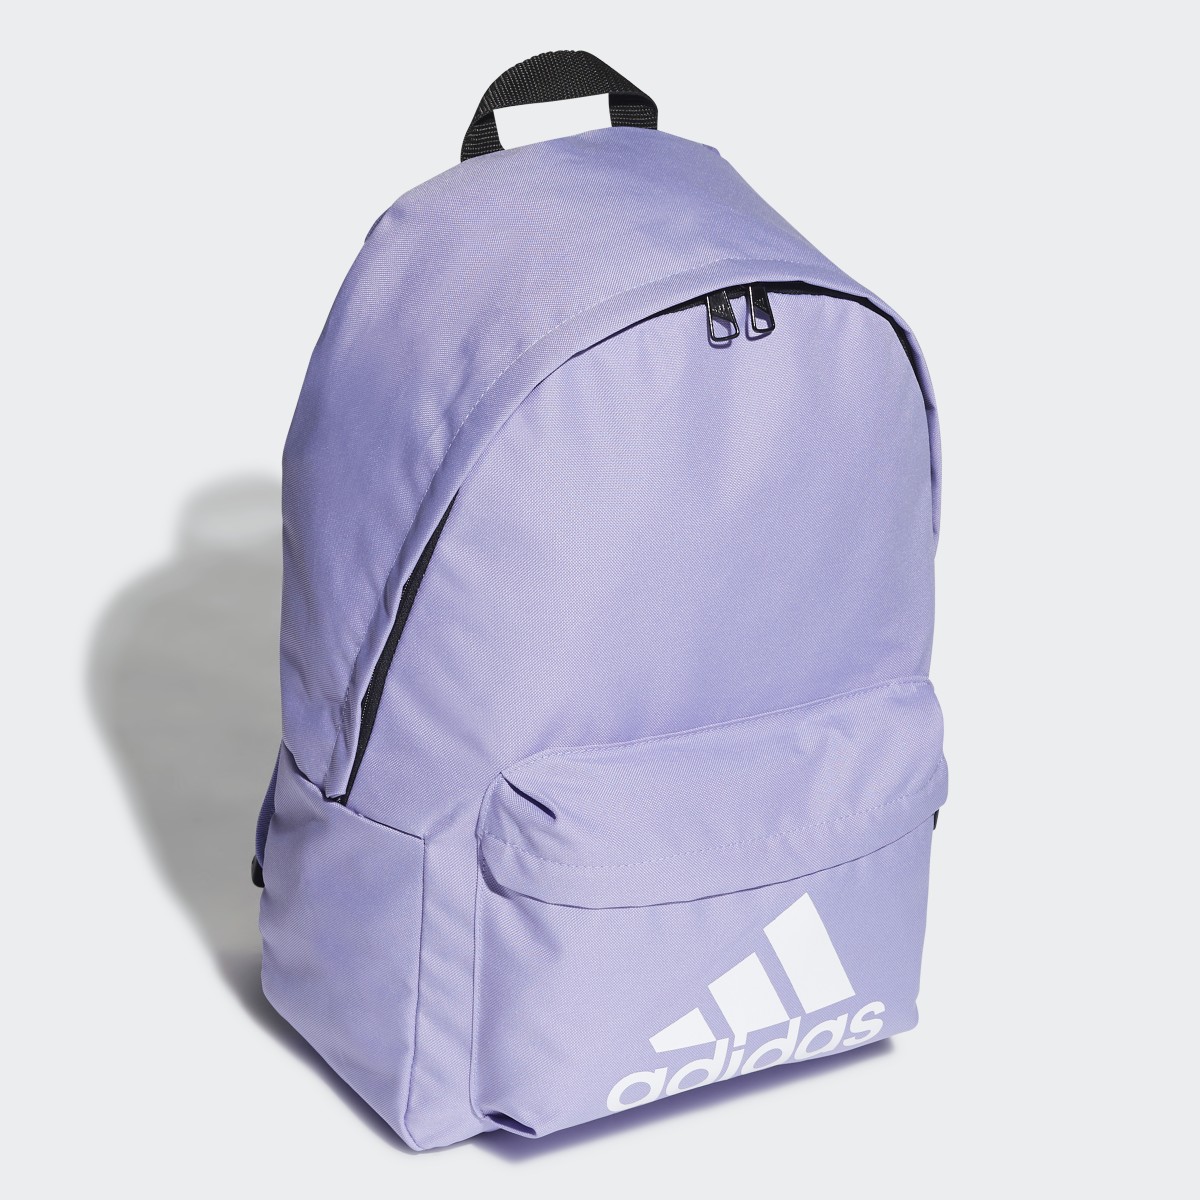 Adidas Classic Badge of Sport Backpack. 4